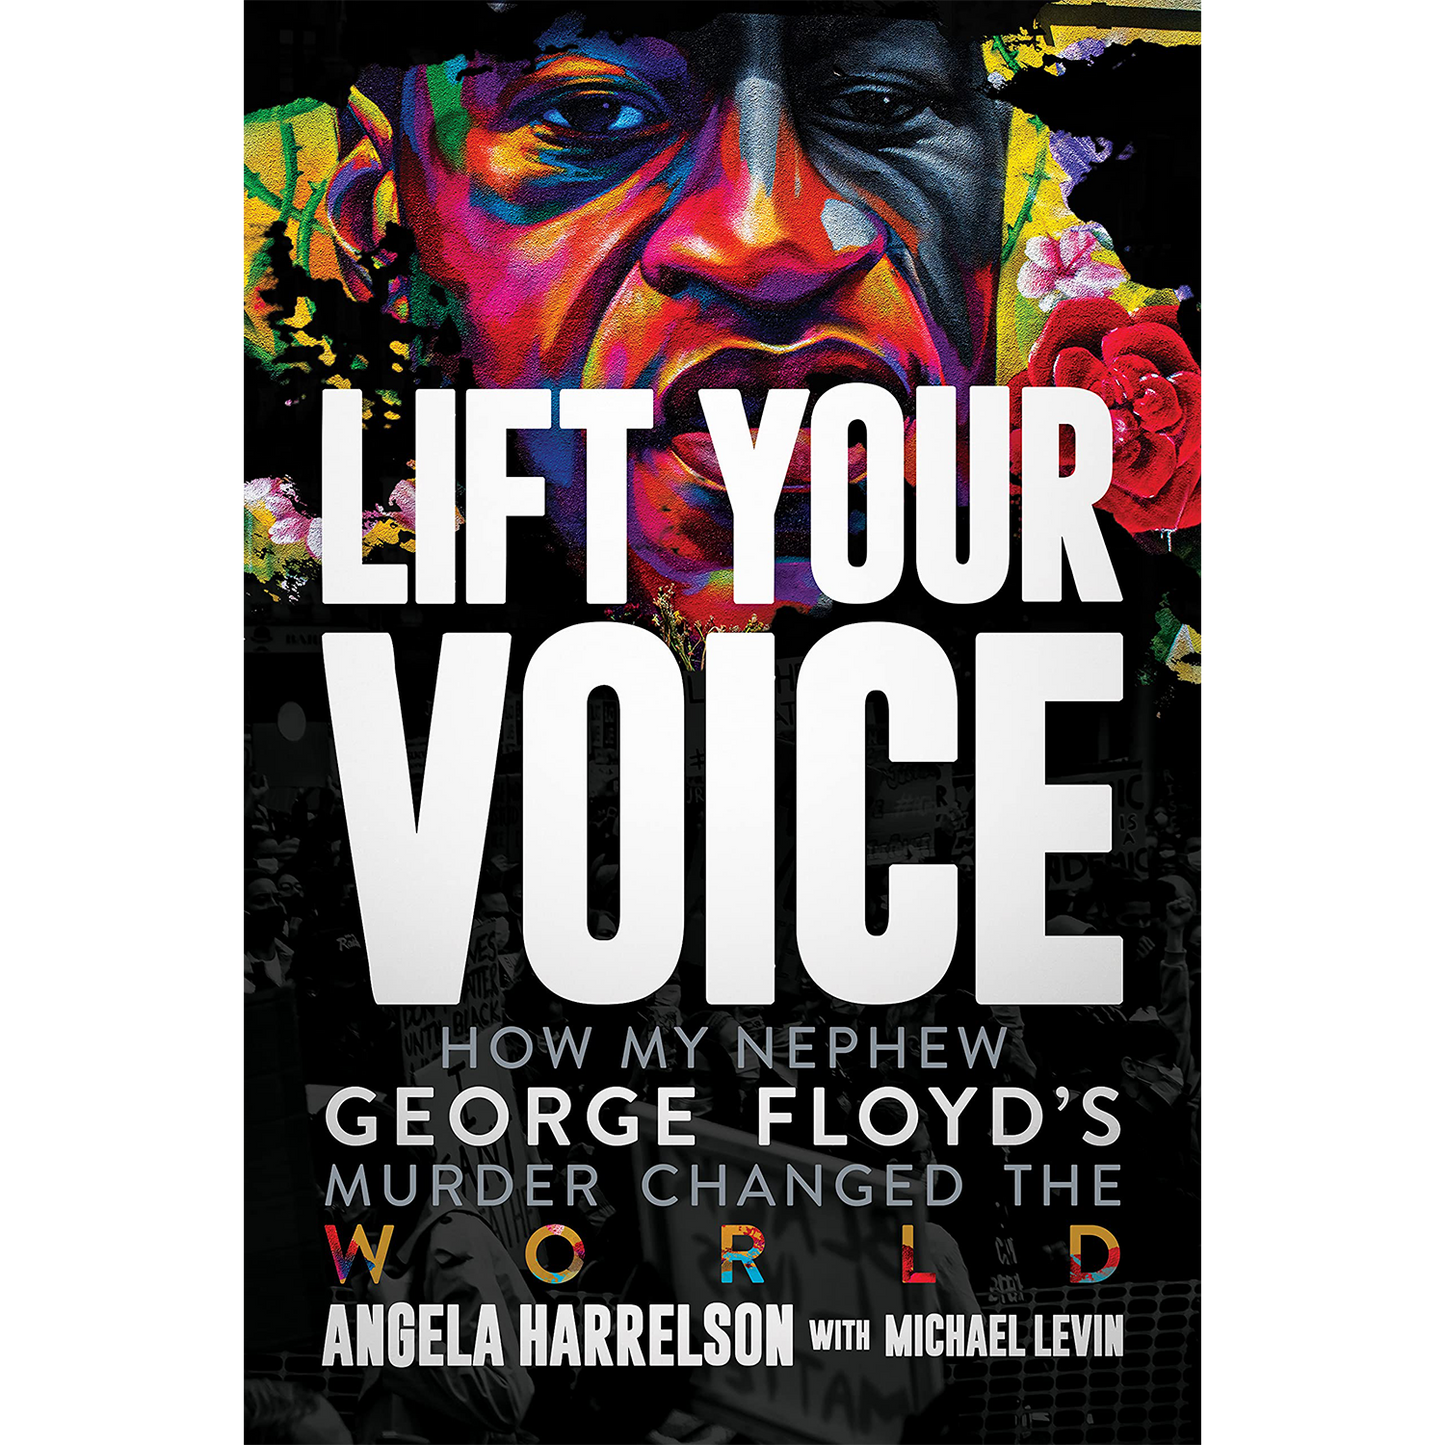 Lift Your Voice: How My Nephew George Floyd's Murder Changed The World (Hardcover)